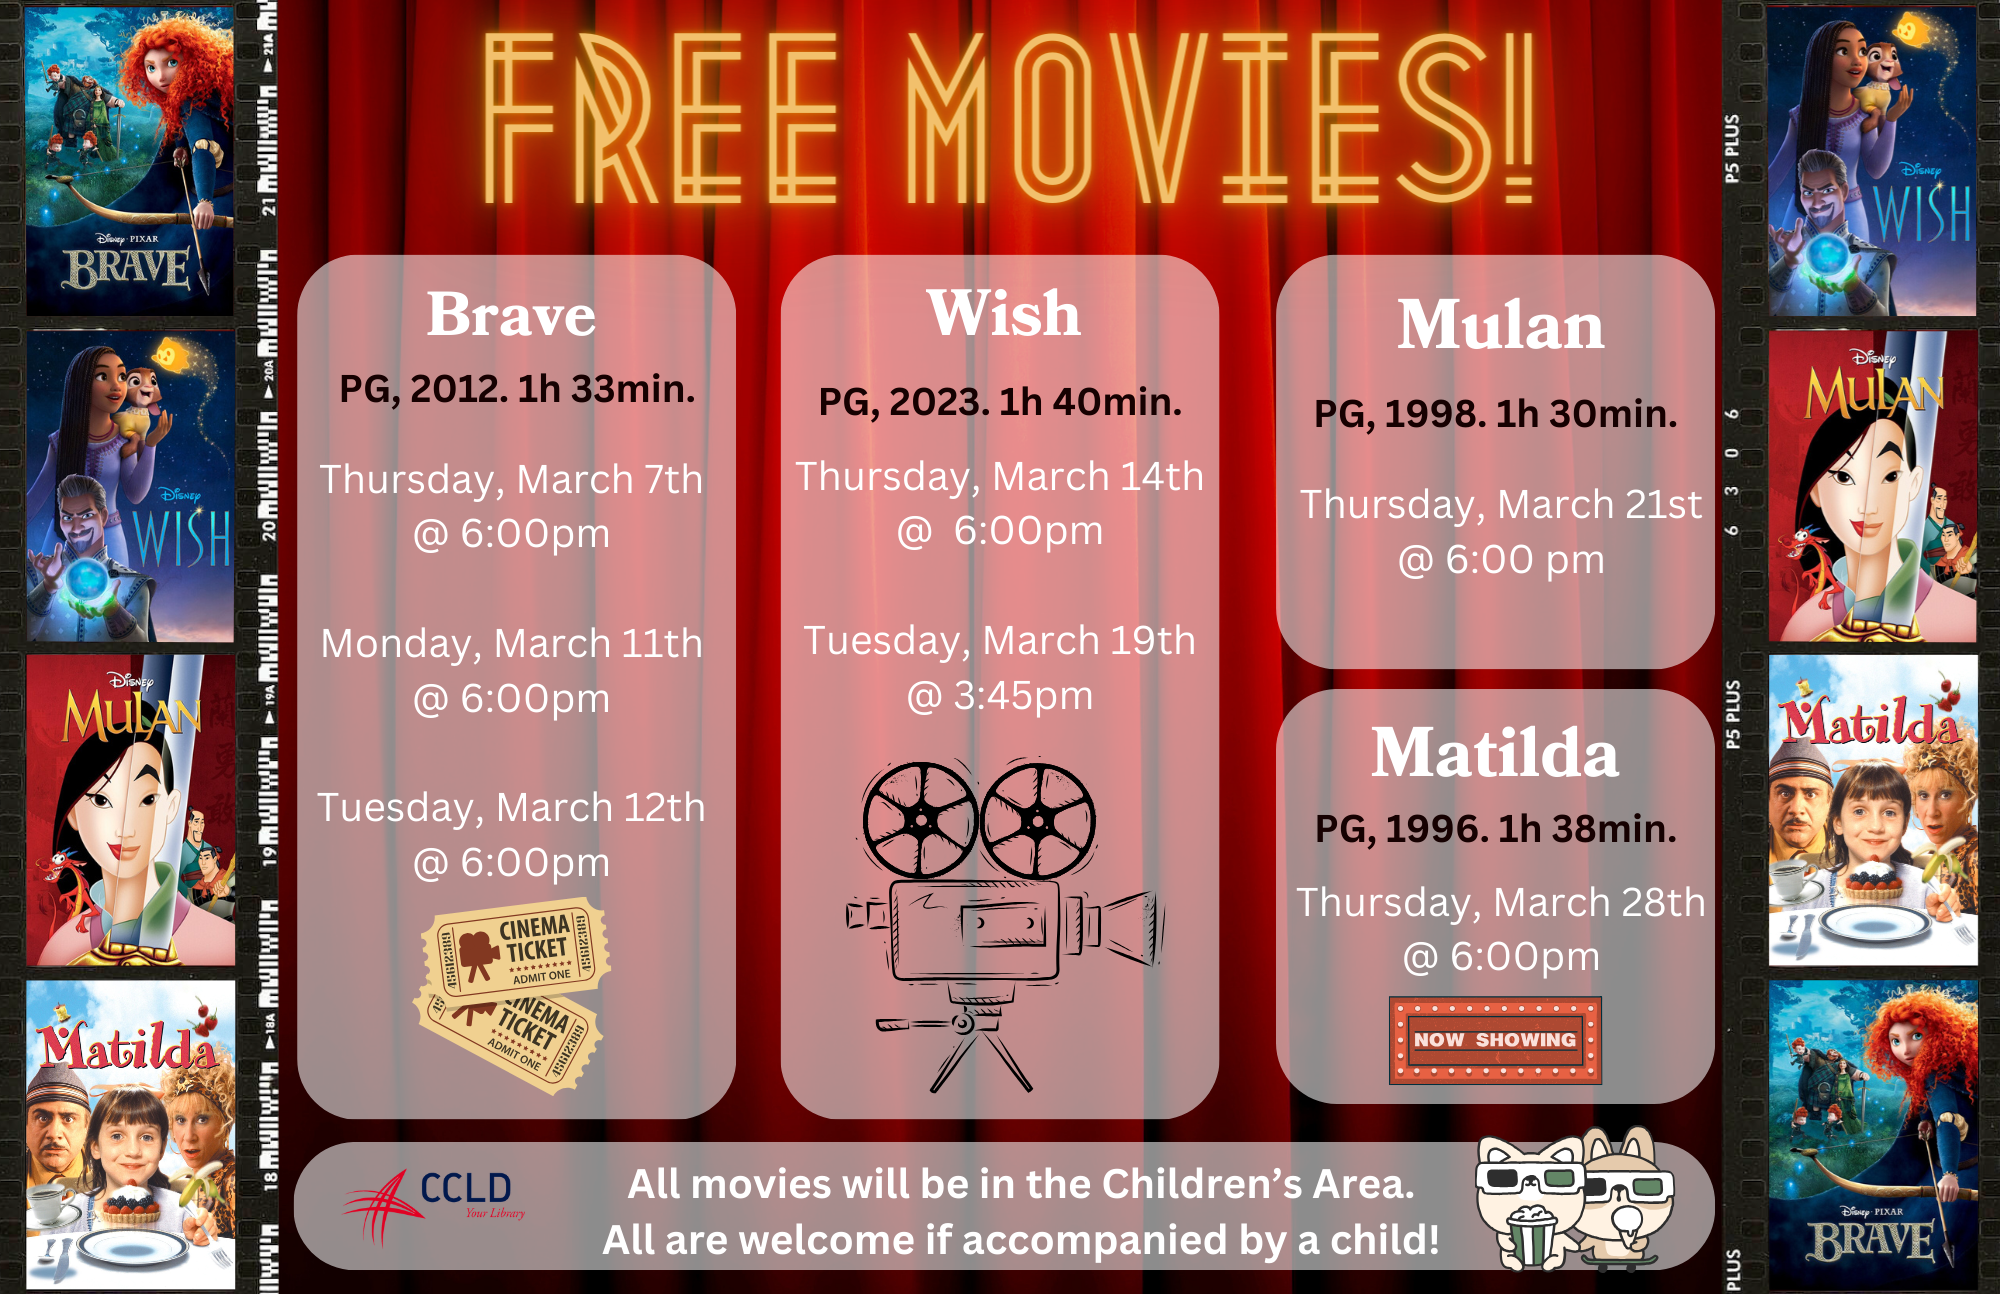 Join us to watch Disney's "Mulan"! 
Rated PG, 1998.
Snacks and water provided. All are welcome if accompanied by a child!